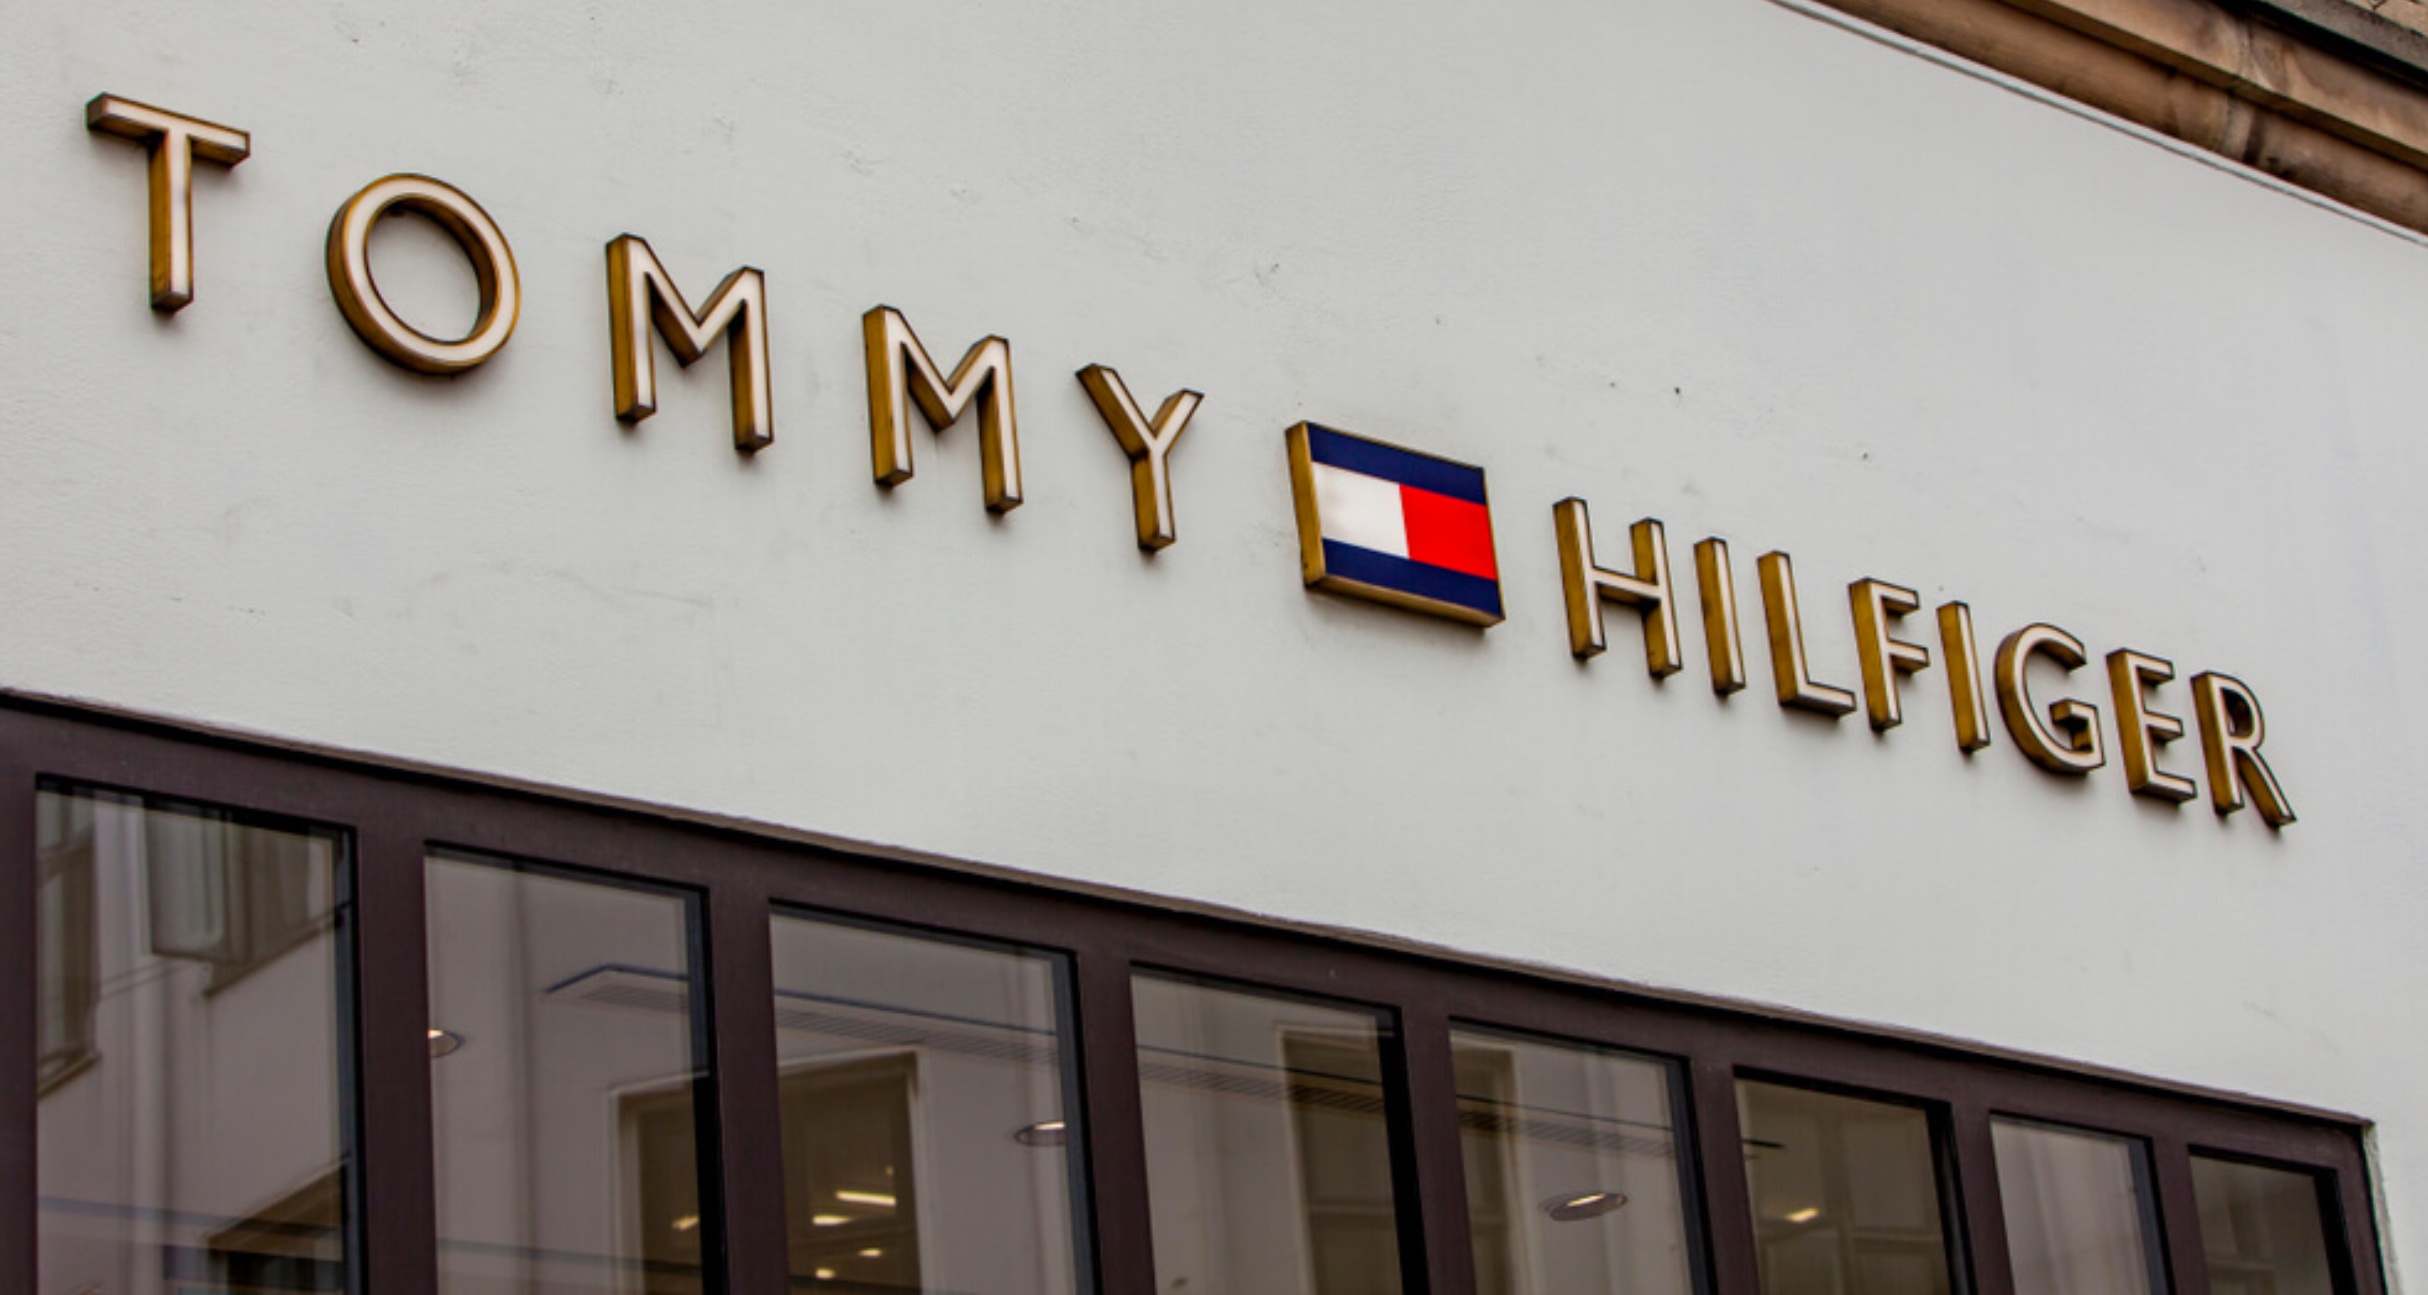 ✨Tommy Hilfiger Outlet Shop With Me✨ Up to 60% Off Sale